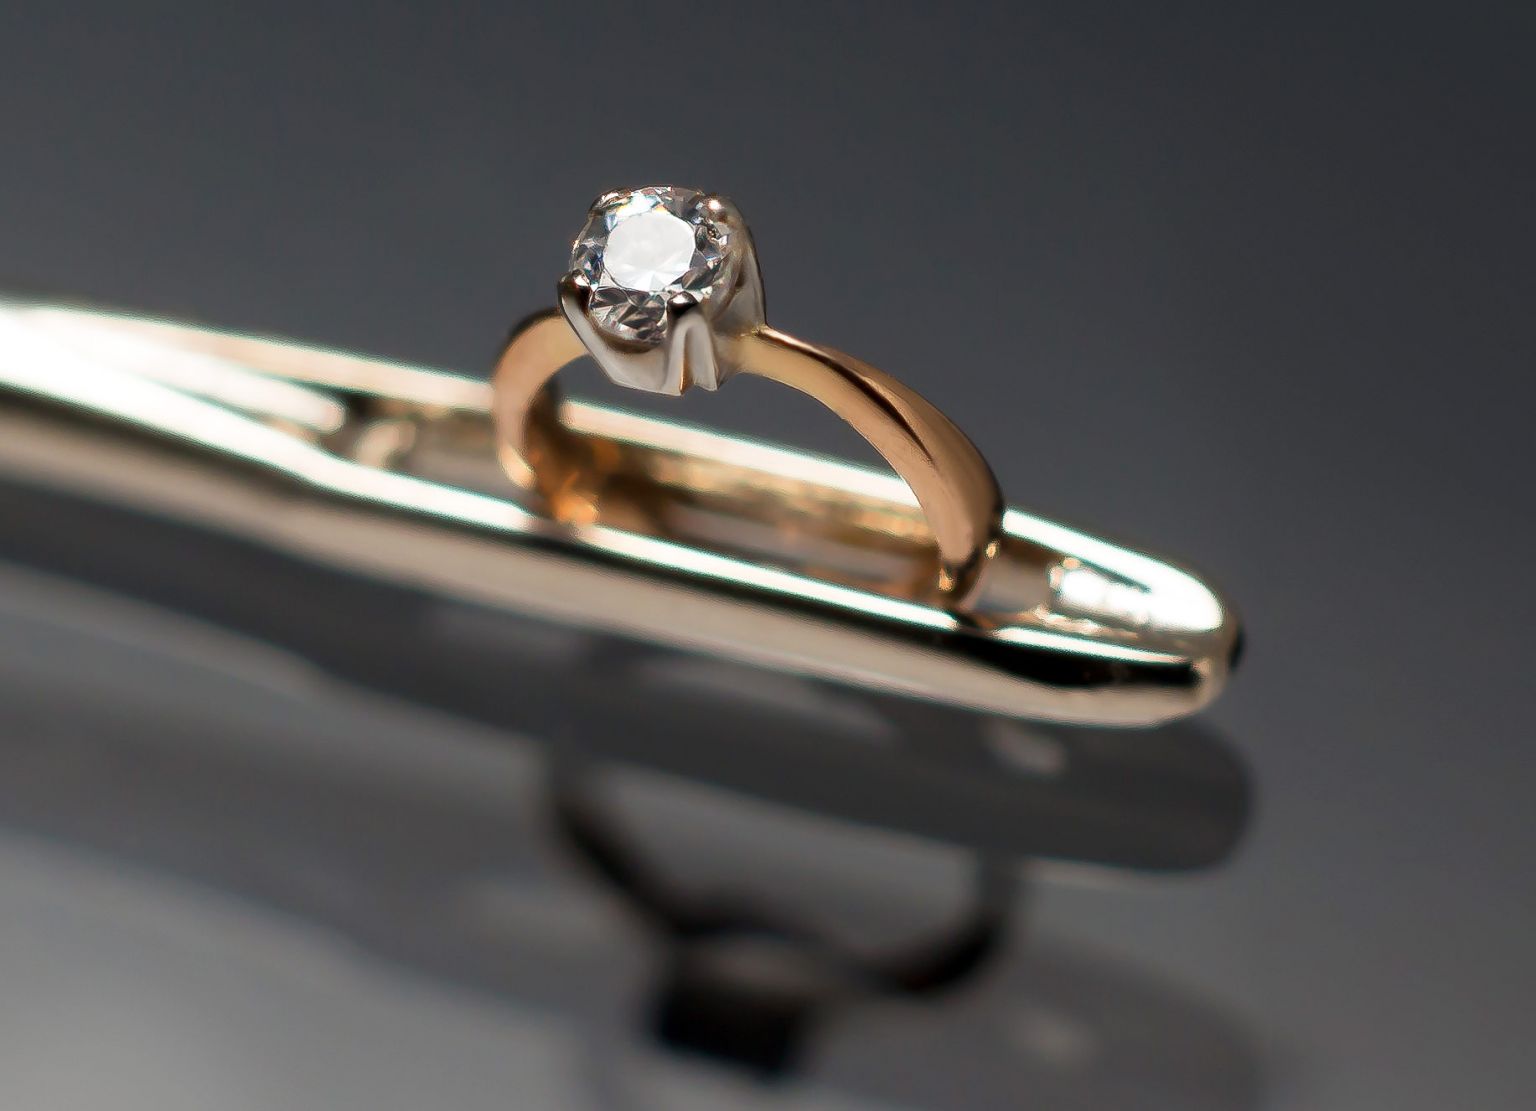 The Smallest Diamond Ring In The World On A Needle 1536x1111 